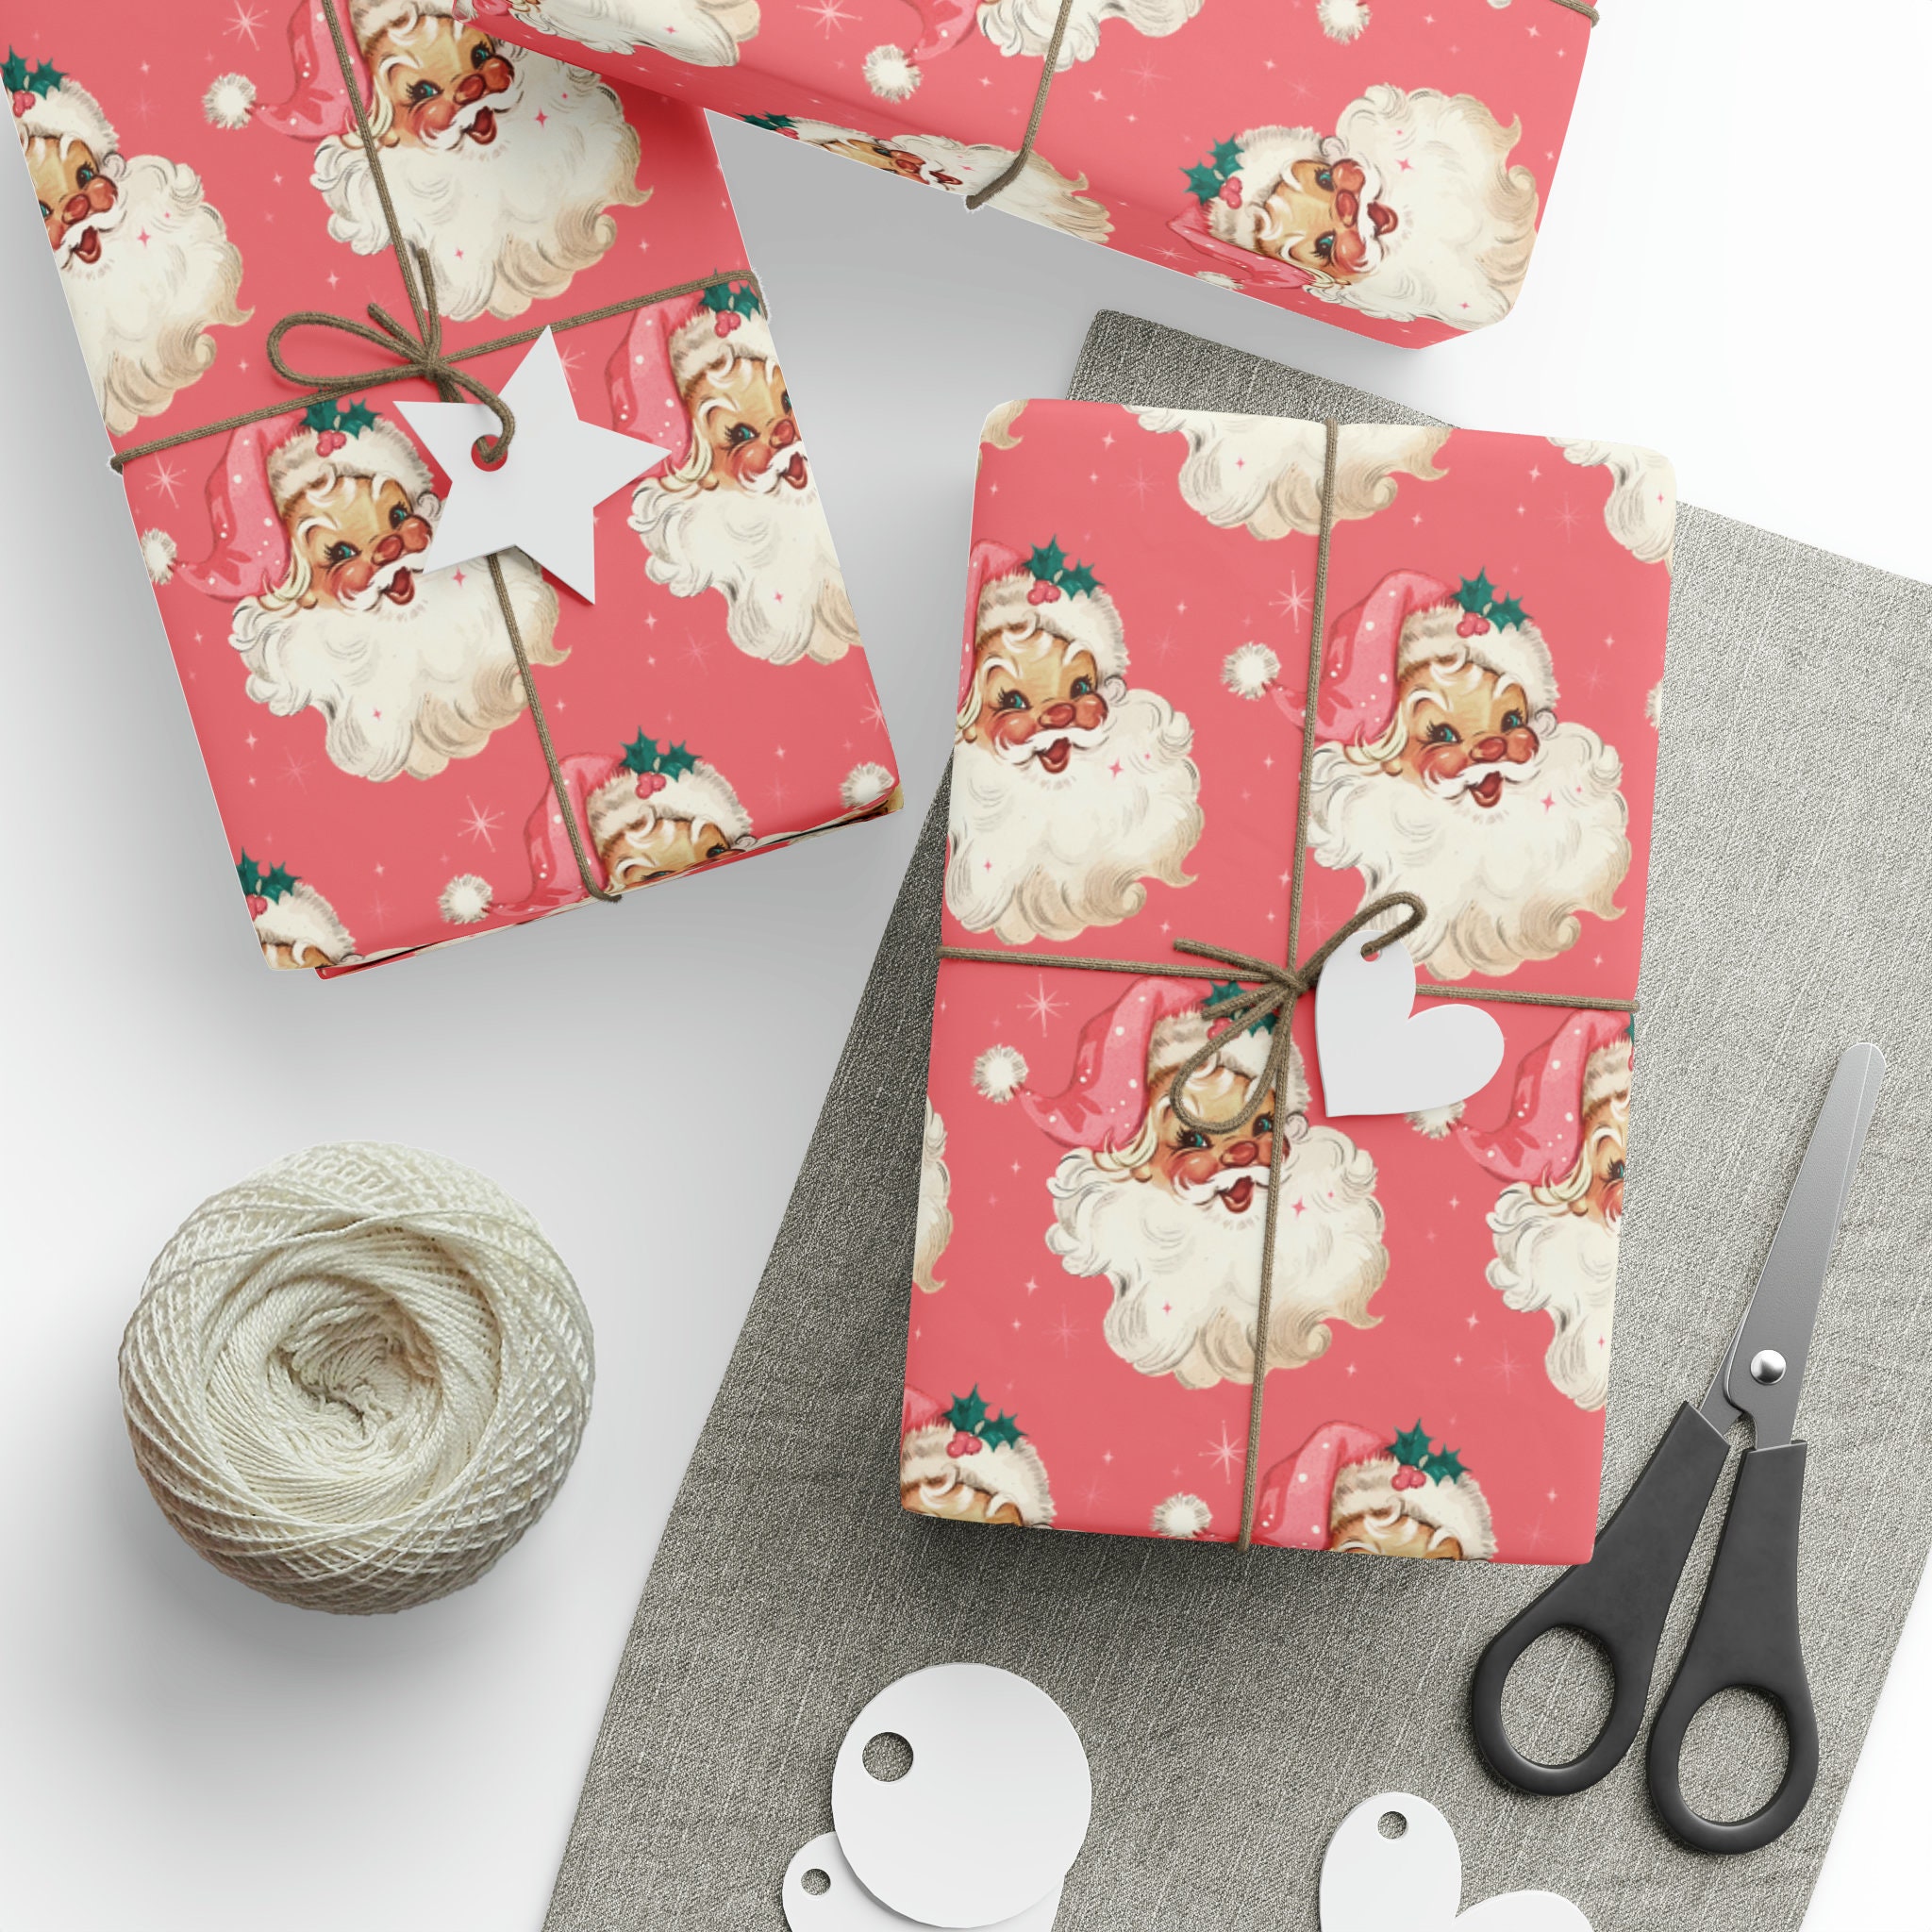 Vintage Rose Wrapping Paper Vintage Wrapping Paper Aesthetic Wrapping  Flower Wrapping Pink Wrapping 